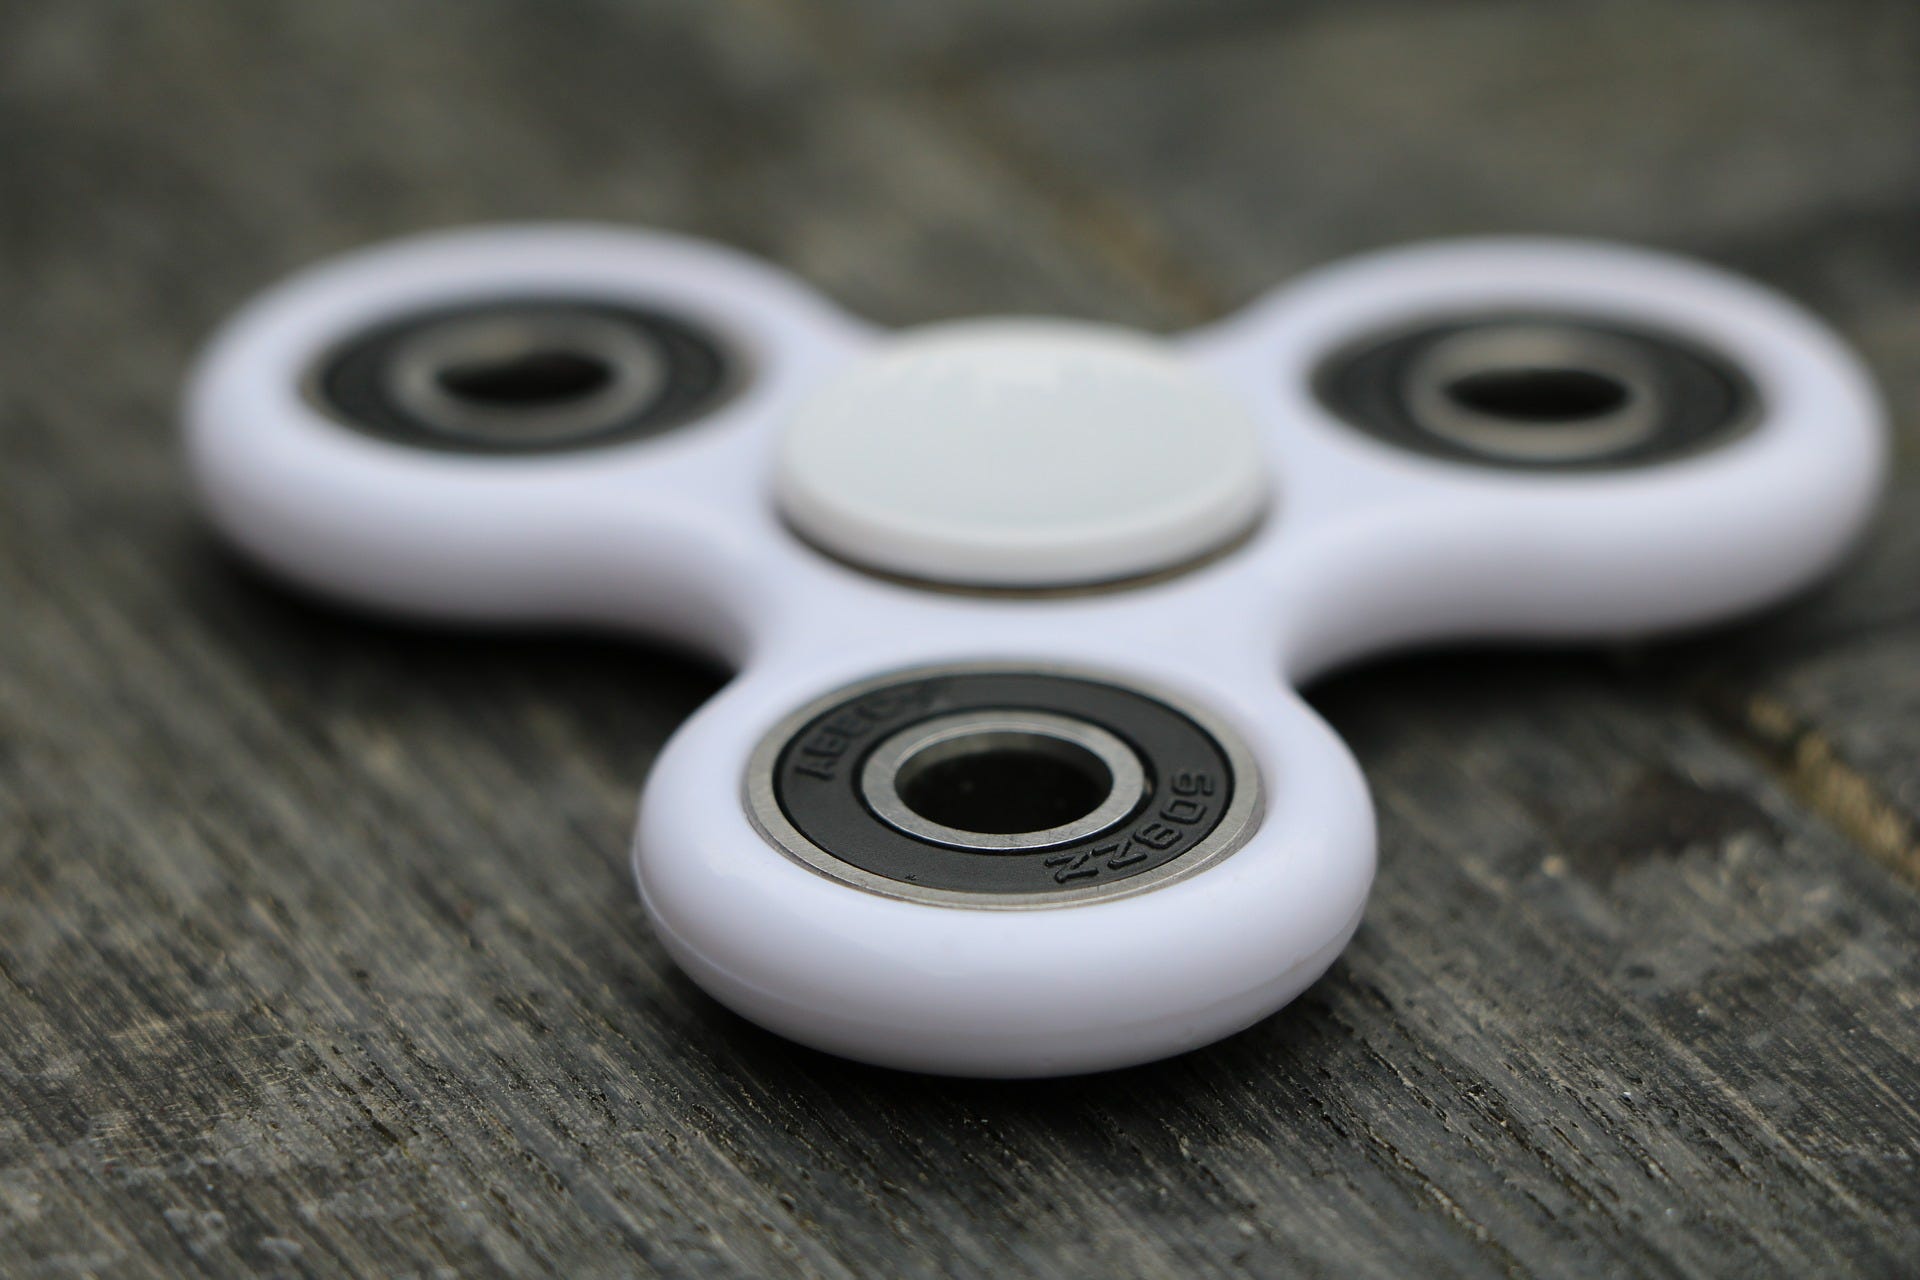 Fidget Spinners: What They Are, How They Work and Why the Controversy